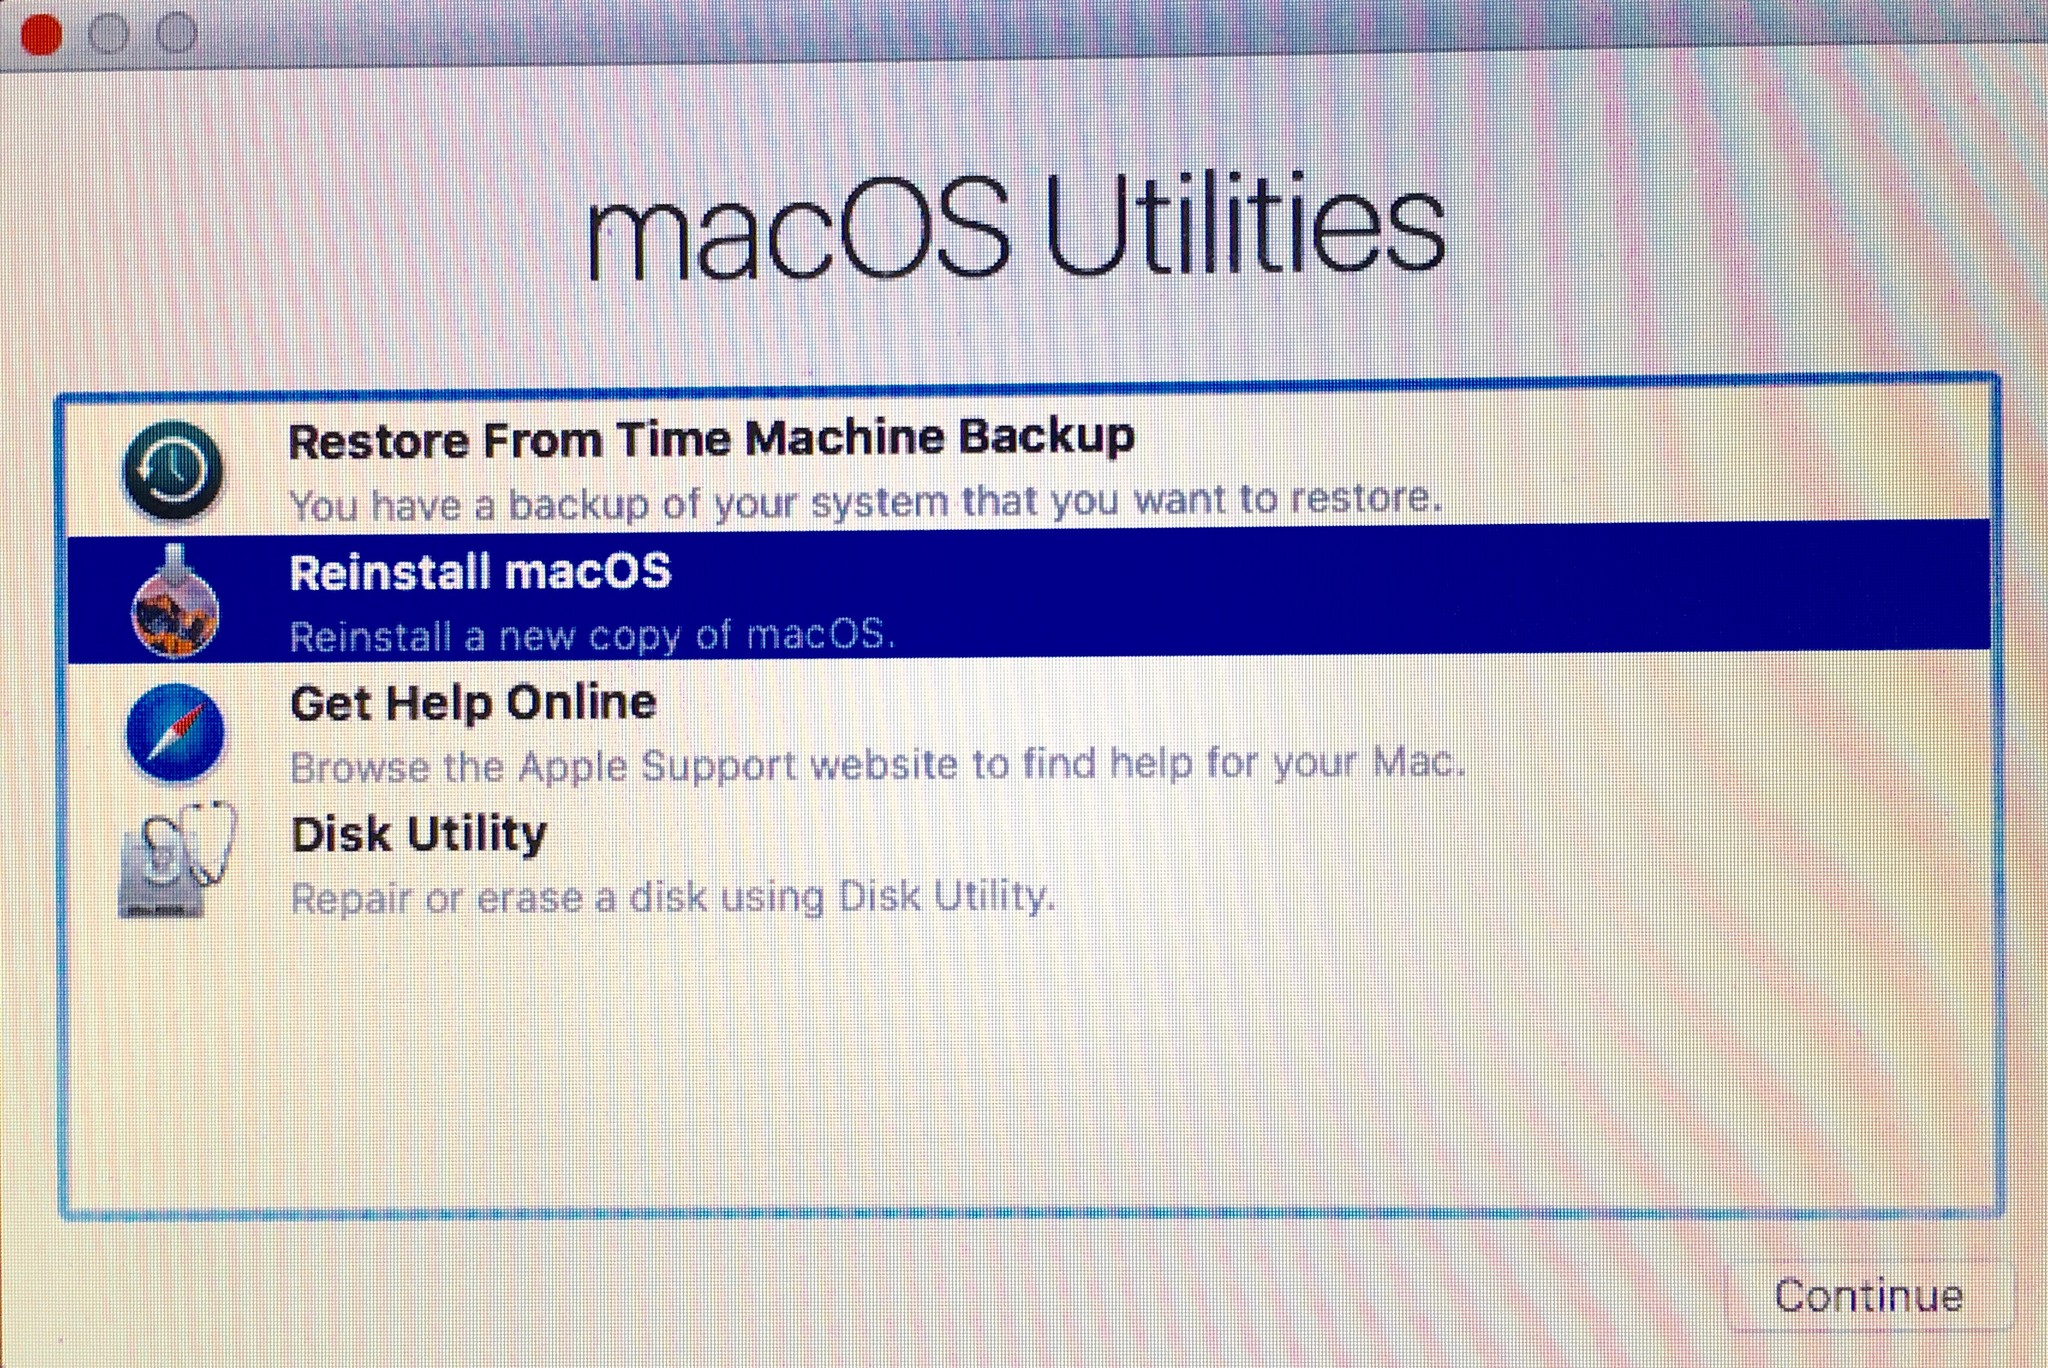 How to reset your Mac before selling it by showing Reinstalling the Mac operating system